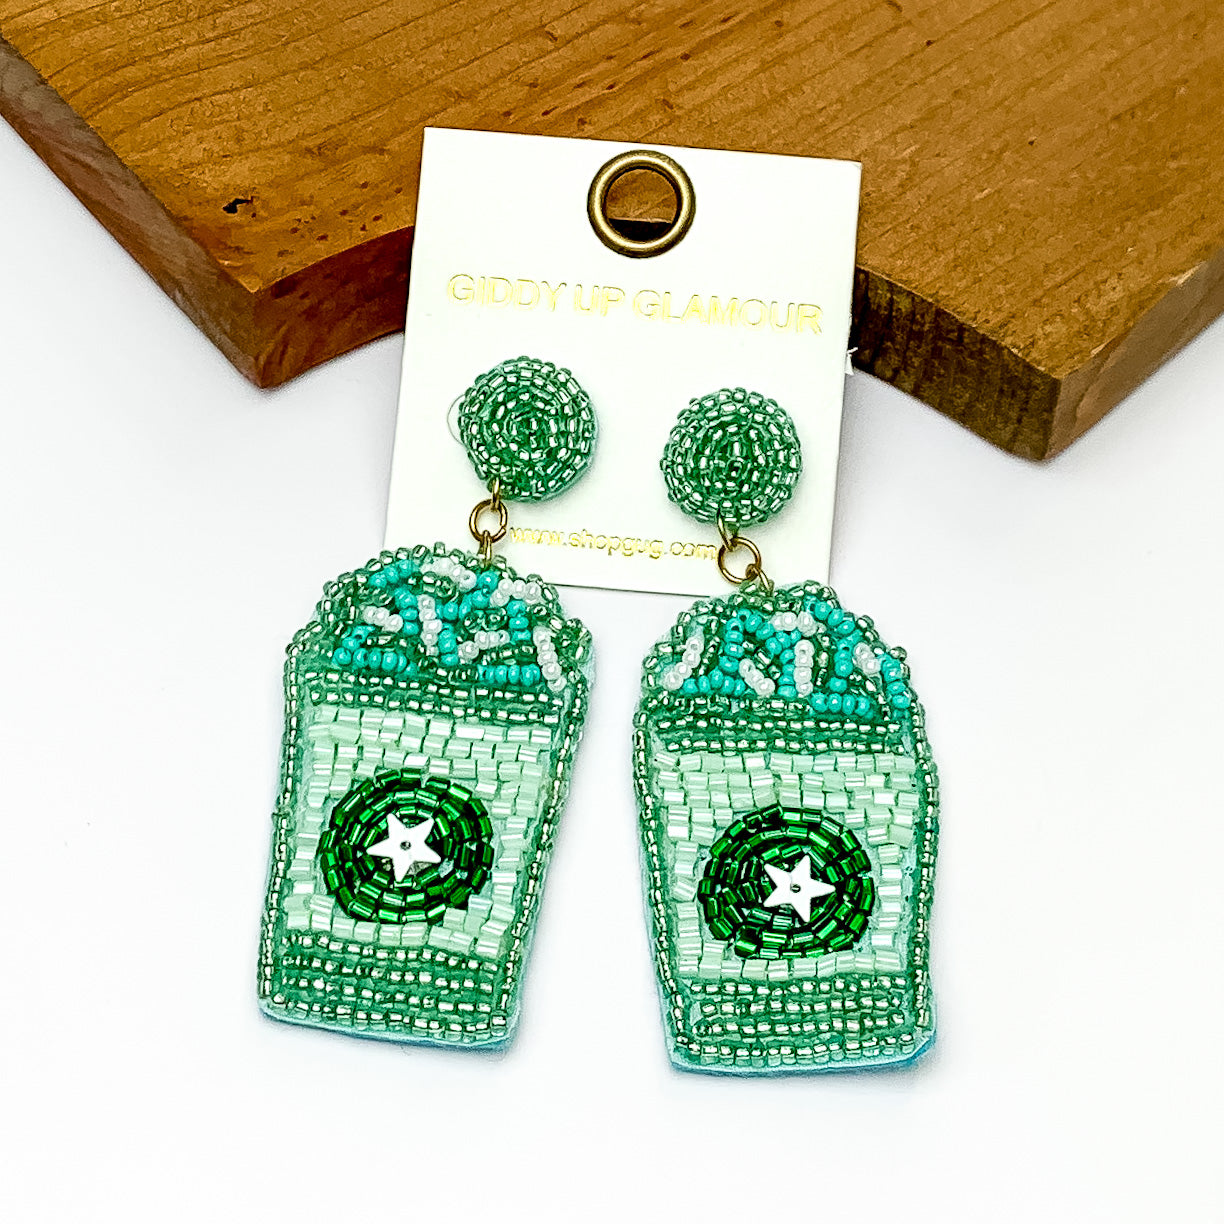 Coffee with The Whip Beaded Earrings in Mint Green. Pictured on a white background laying against a piece of wood. 